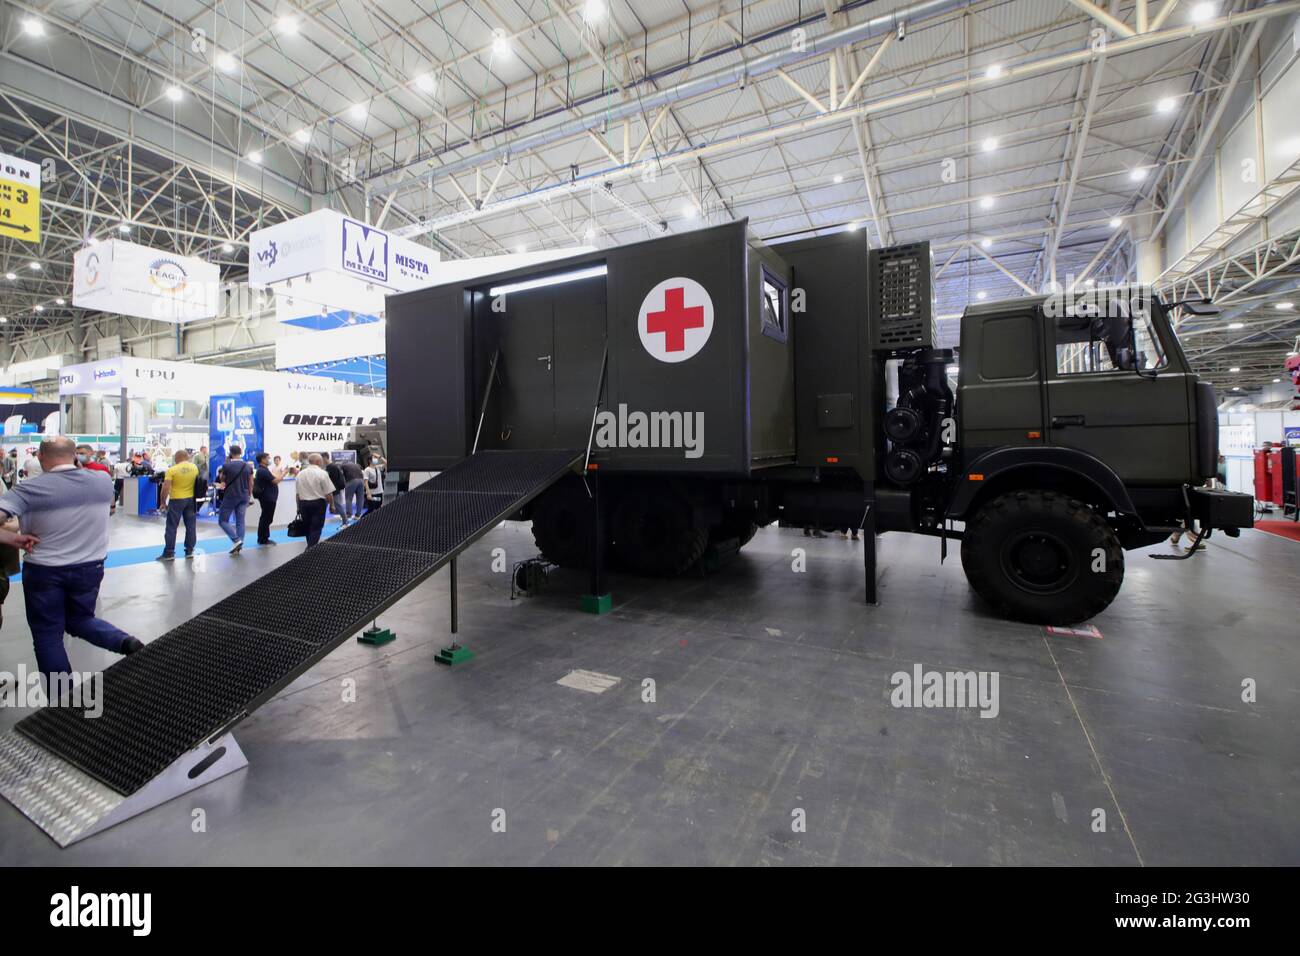 KYIV, UKRAINE - JUNE 16, 2021 - A military medical truck is on show during the 17th Arms and Security International Exhibition at the International Ex Stock Photo